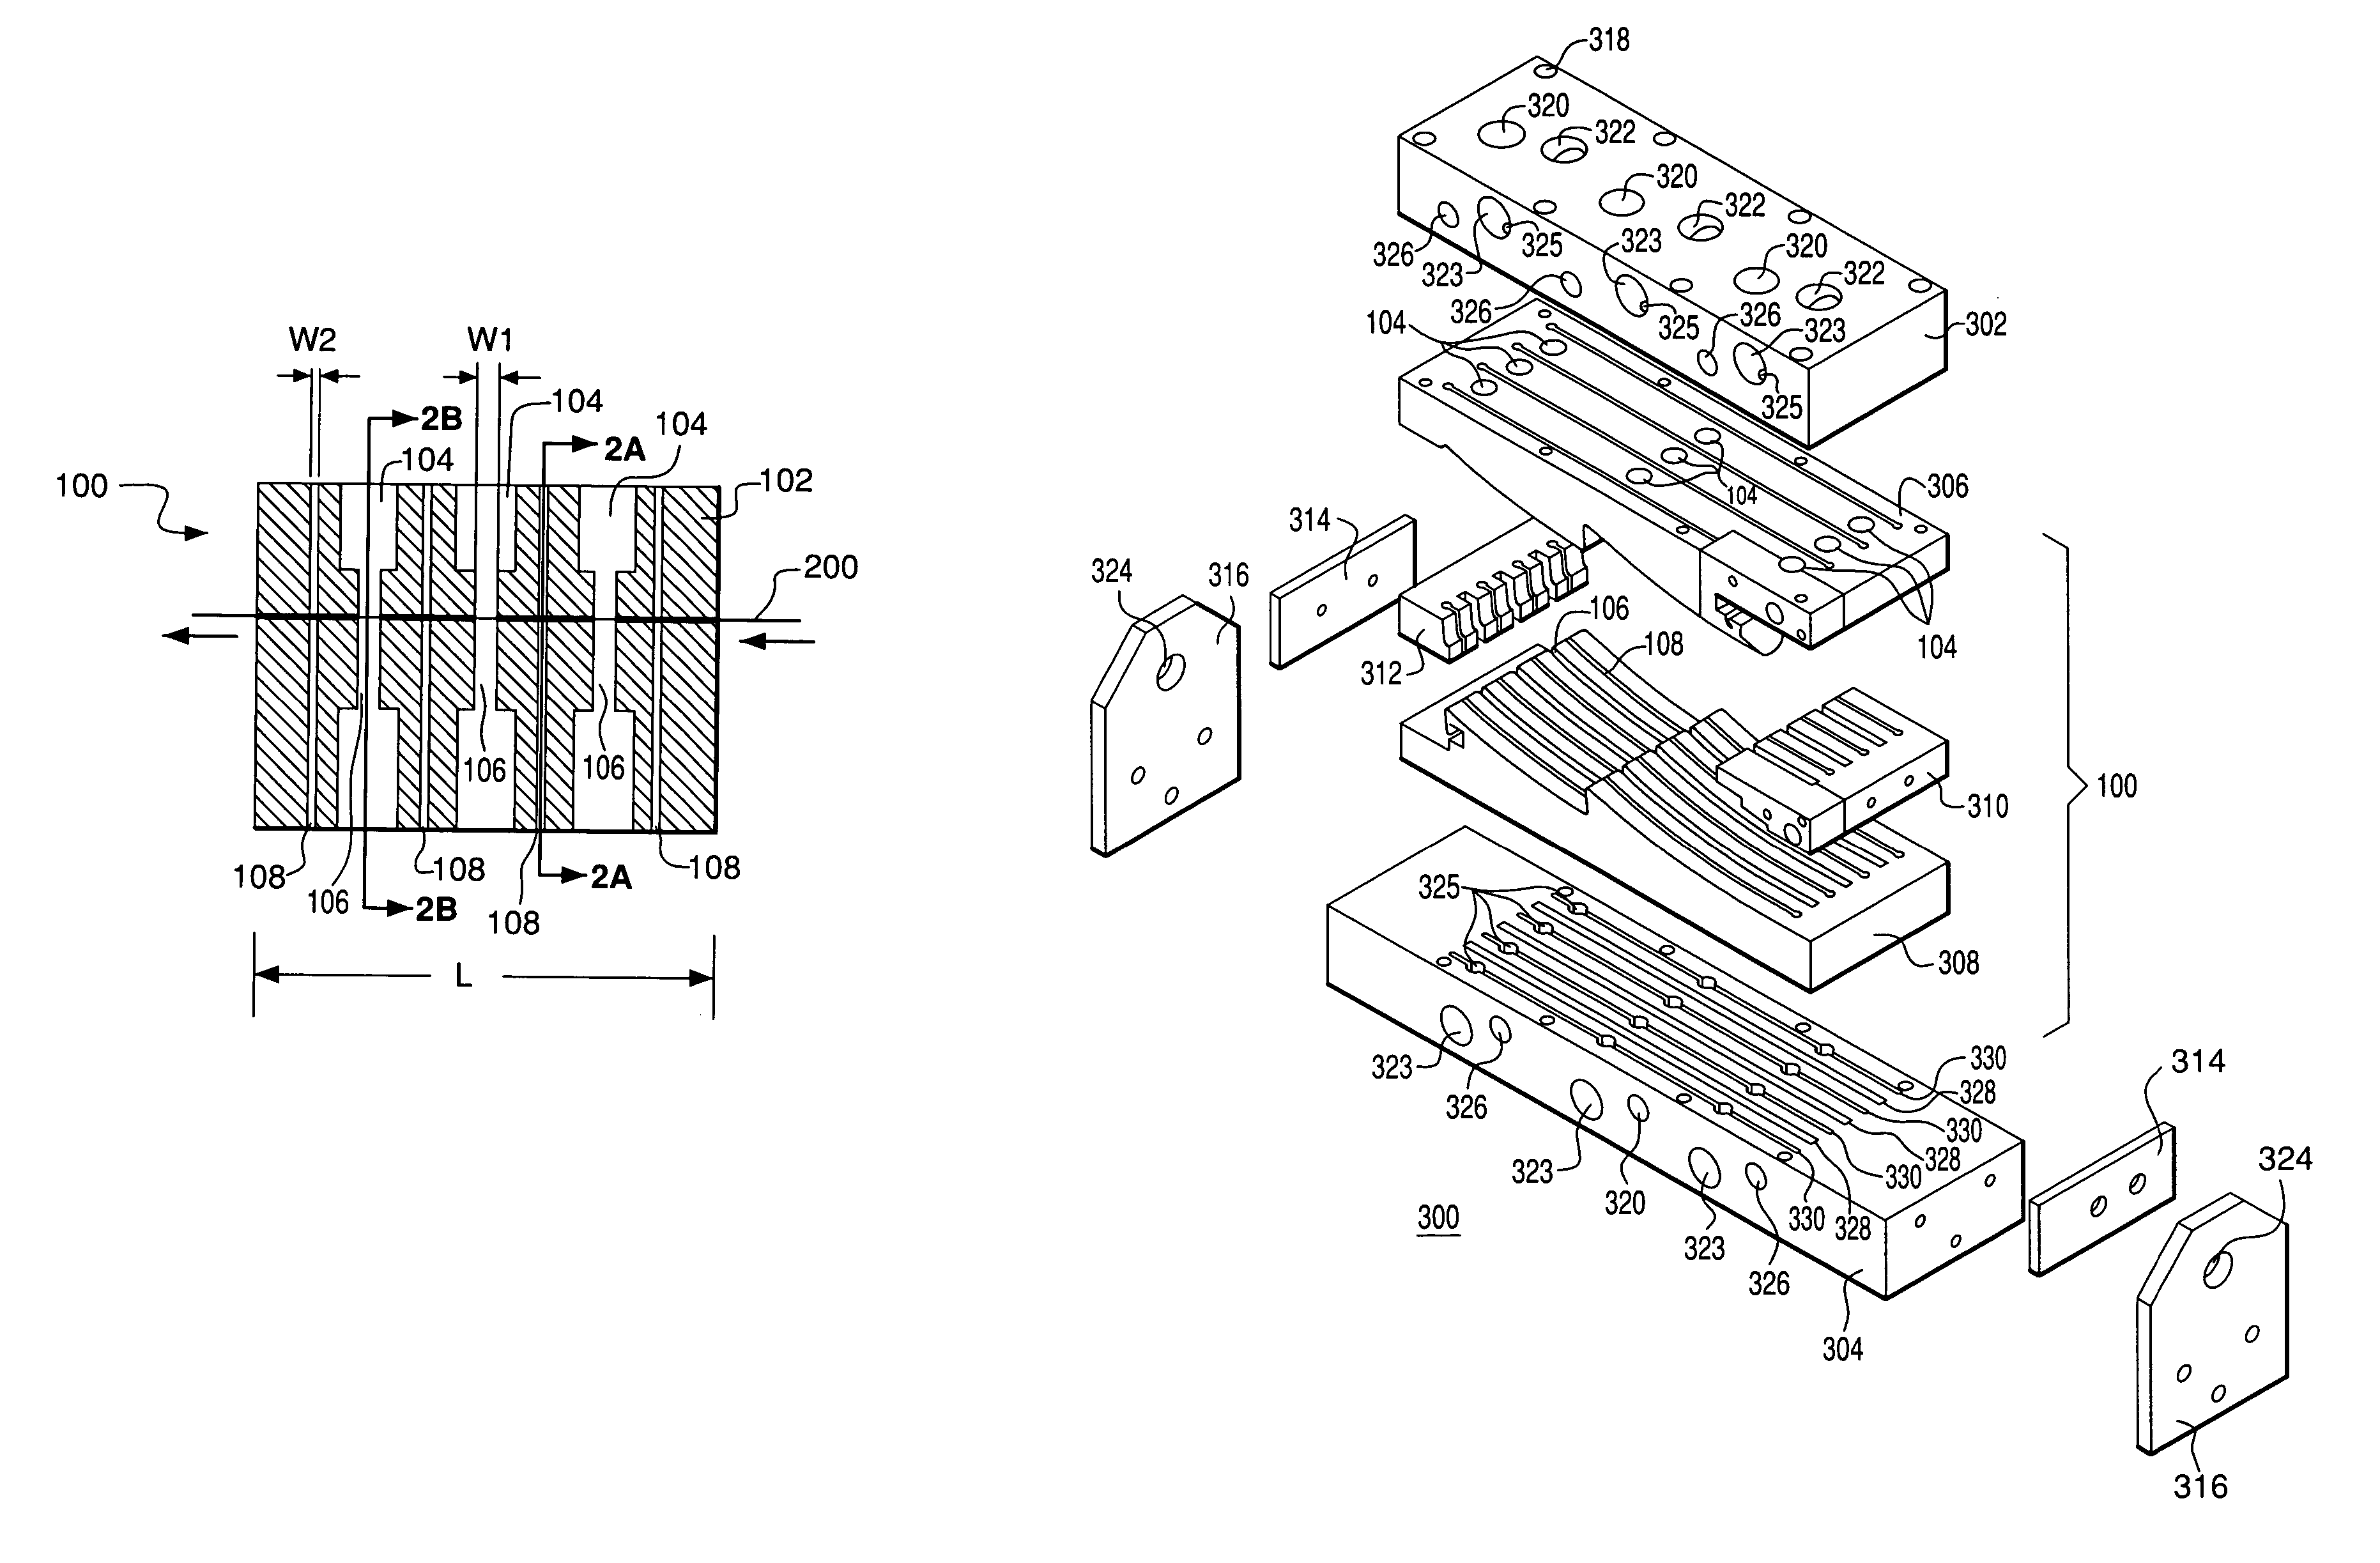 Sizer for forming shaped polymeric articles and method of sizing polymeric articles